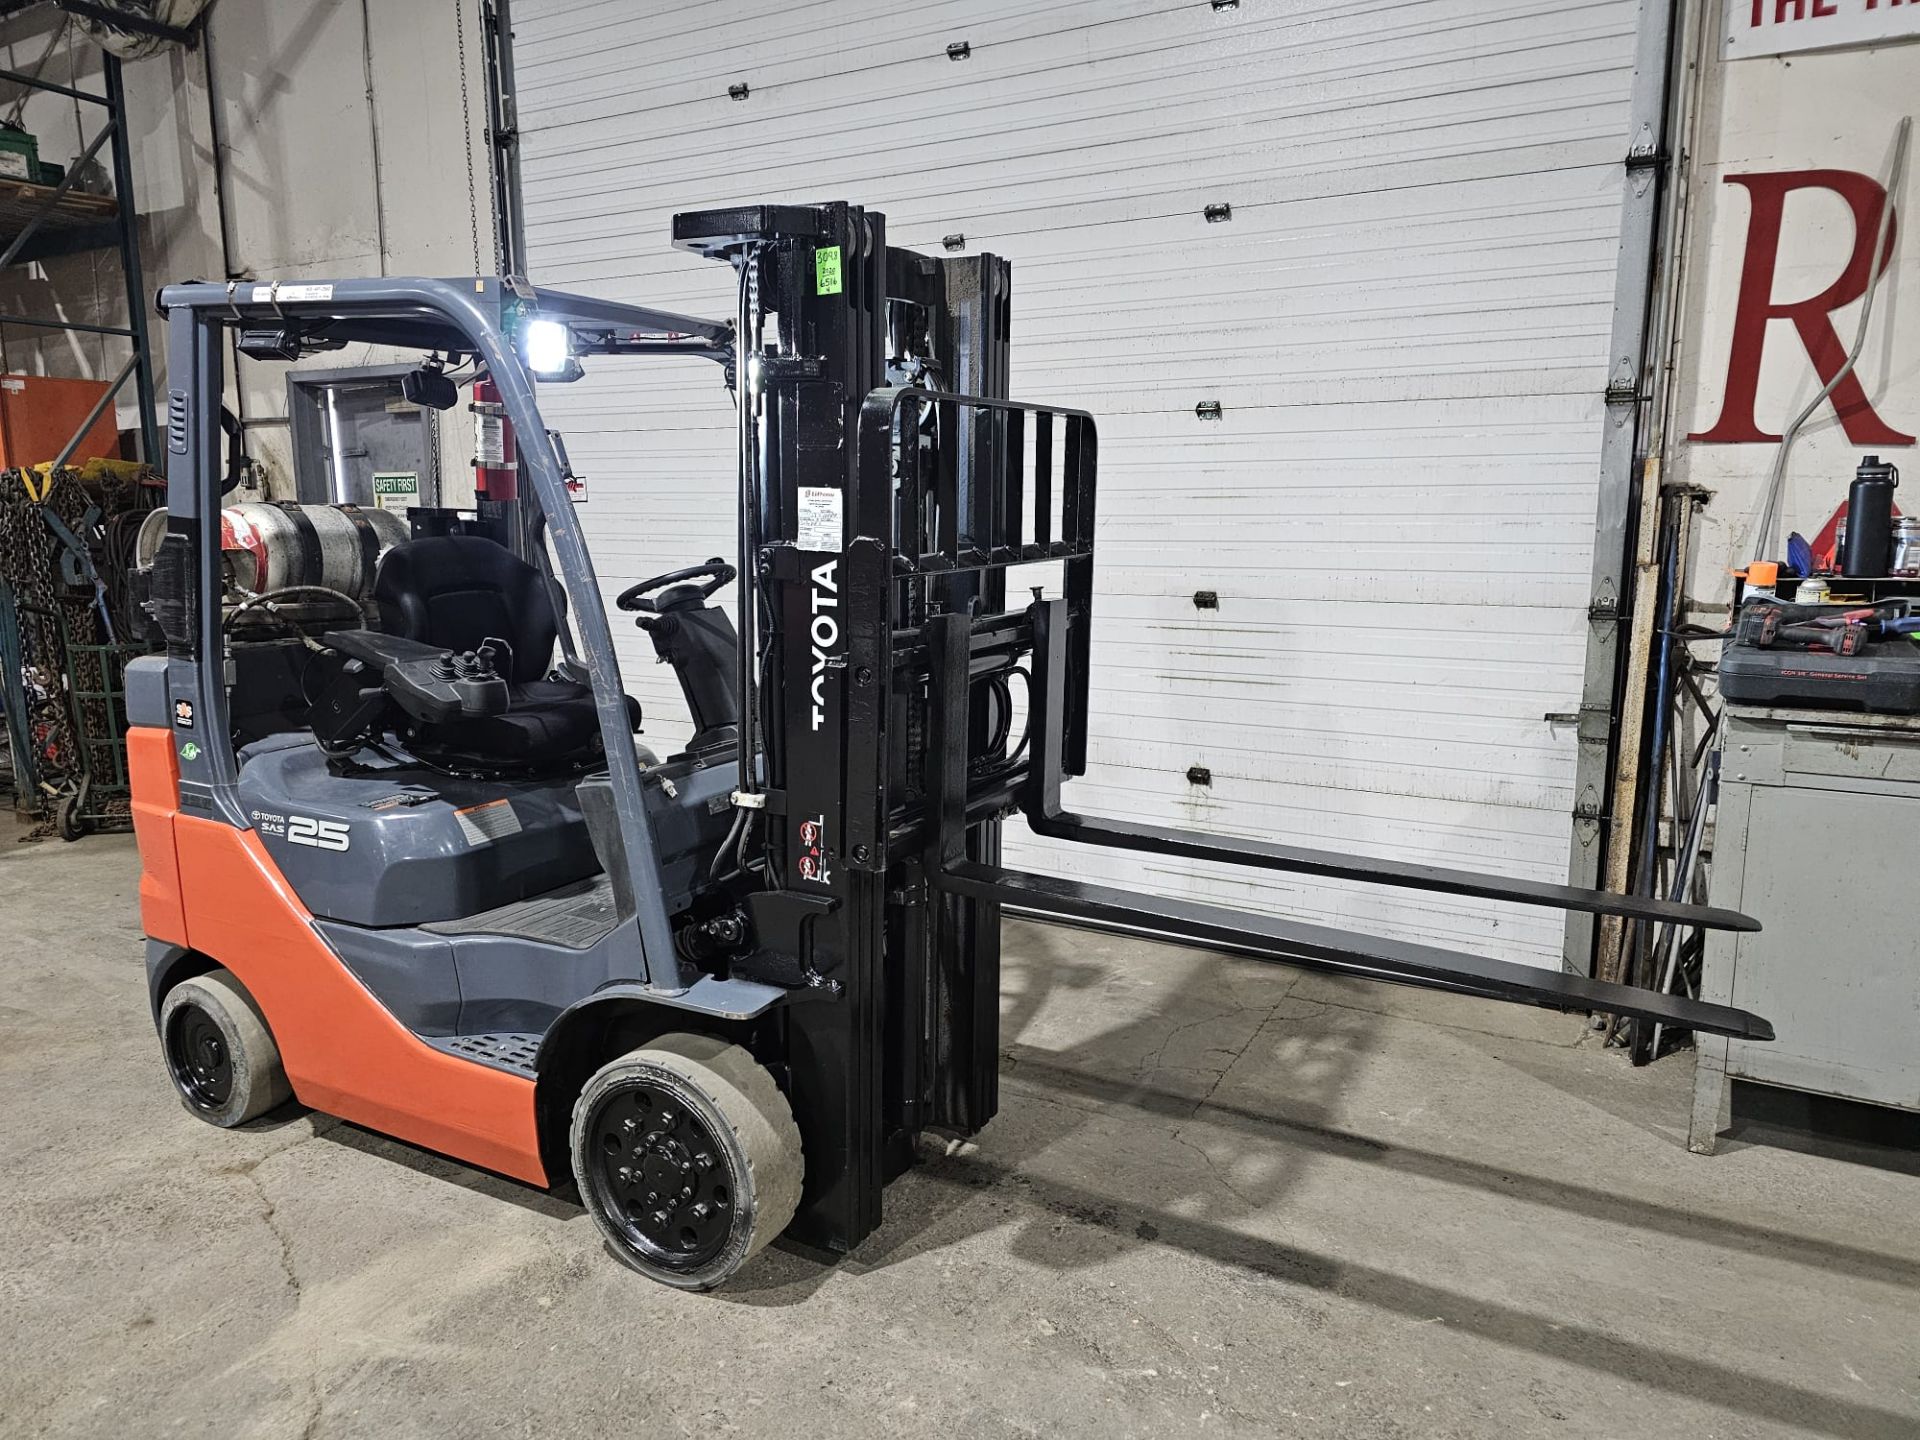 2020 Toyota 5,000lbs Capacity LPG (Propane) Forklift sideshift 3-STAGE MAST 189" load height with - Image 2 of 6